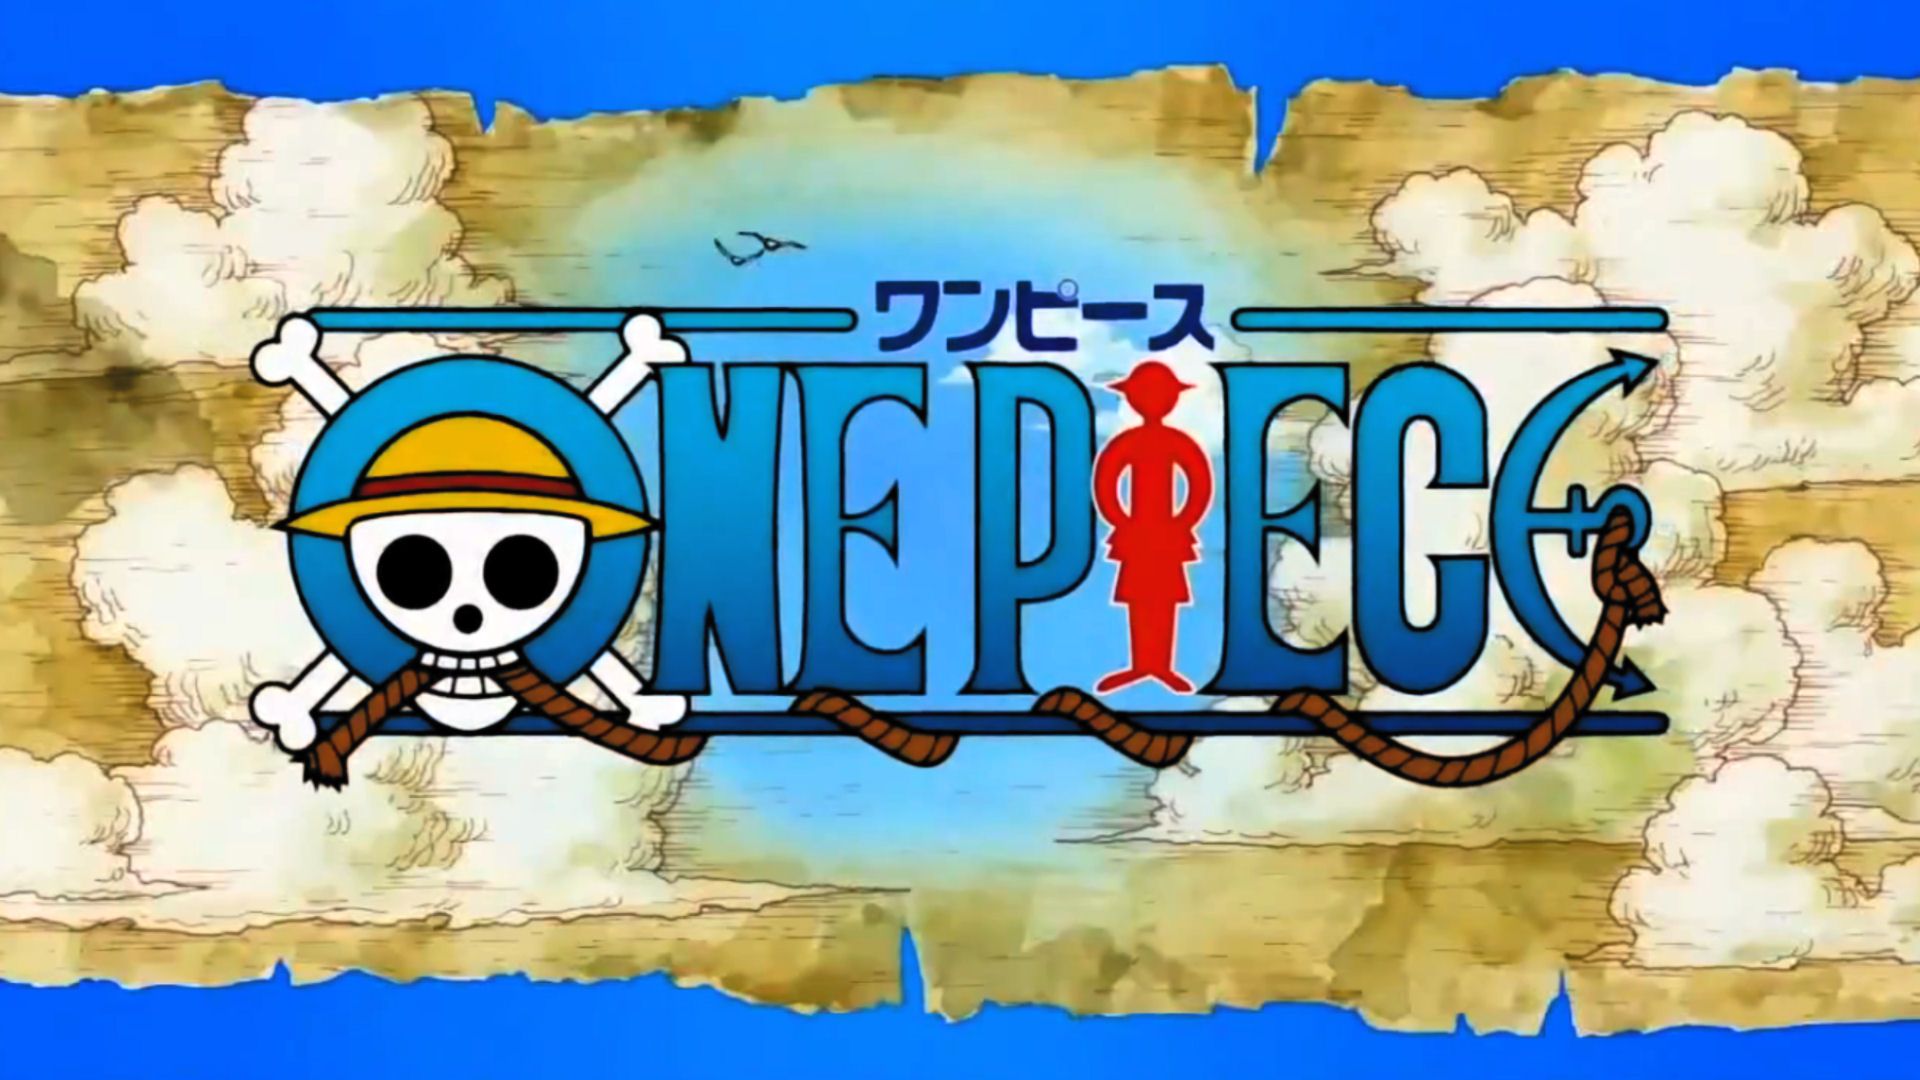 Free download Anime One Piece Wallpaper Anime One Piece HD Wallpaper Anime [1920x1080] for your Desktop, Mobile & Tablet. Explore One Piece Manga Wallpaper. One Piece Manga Wallpaper, One